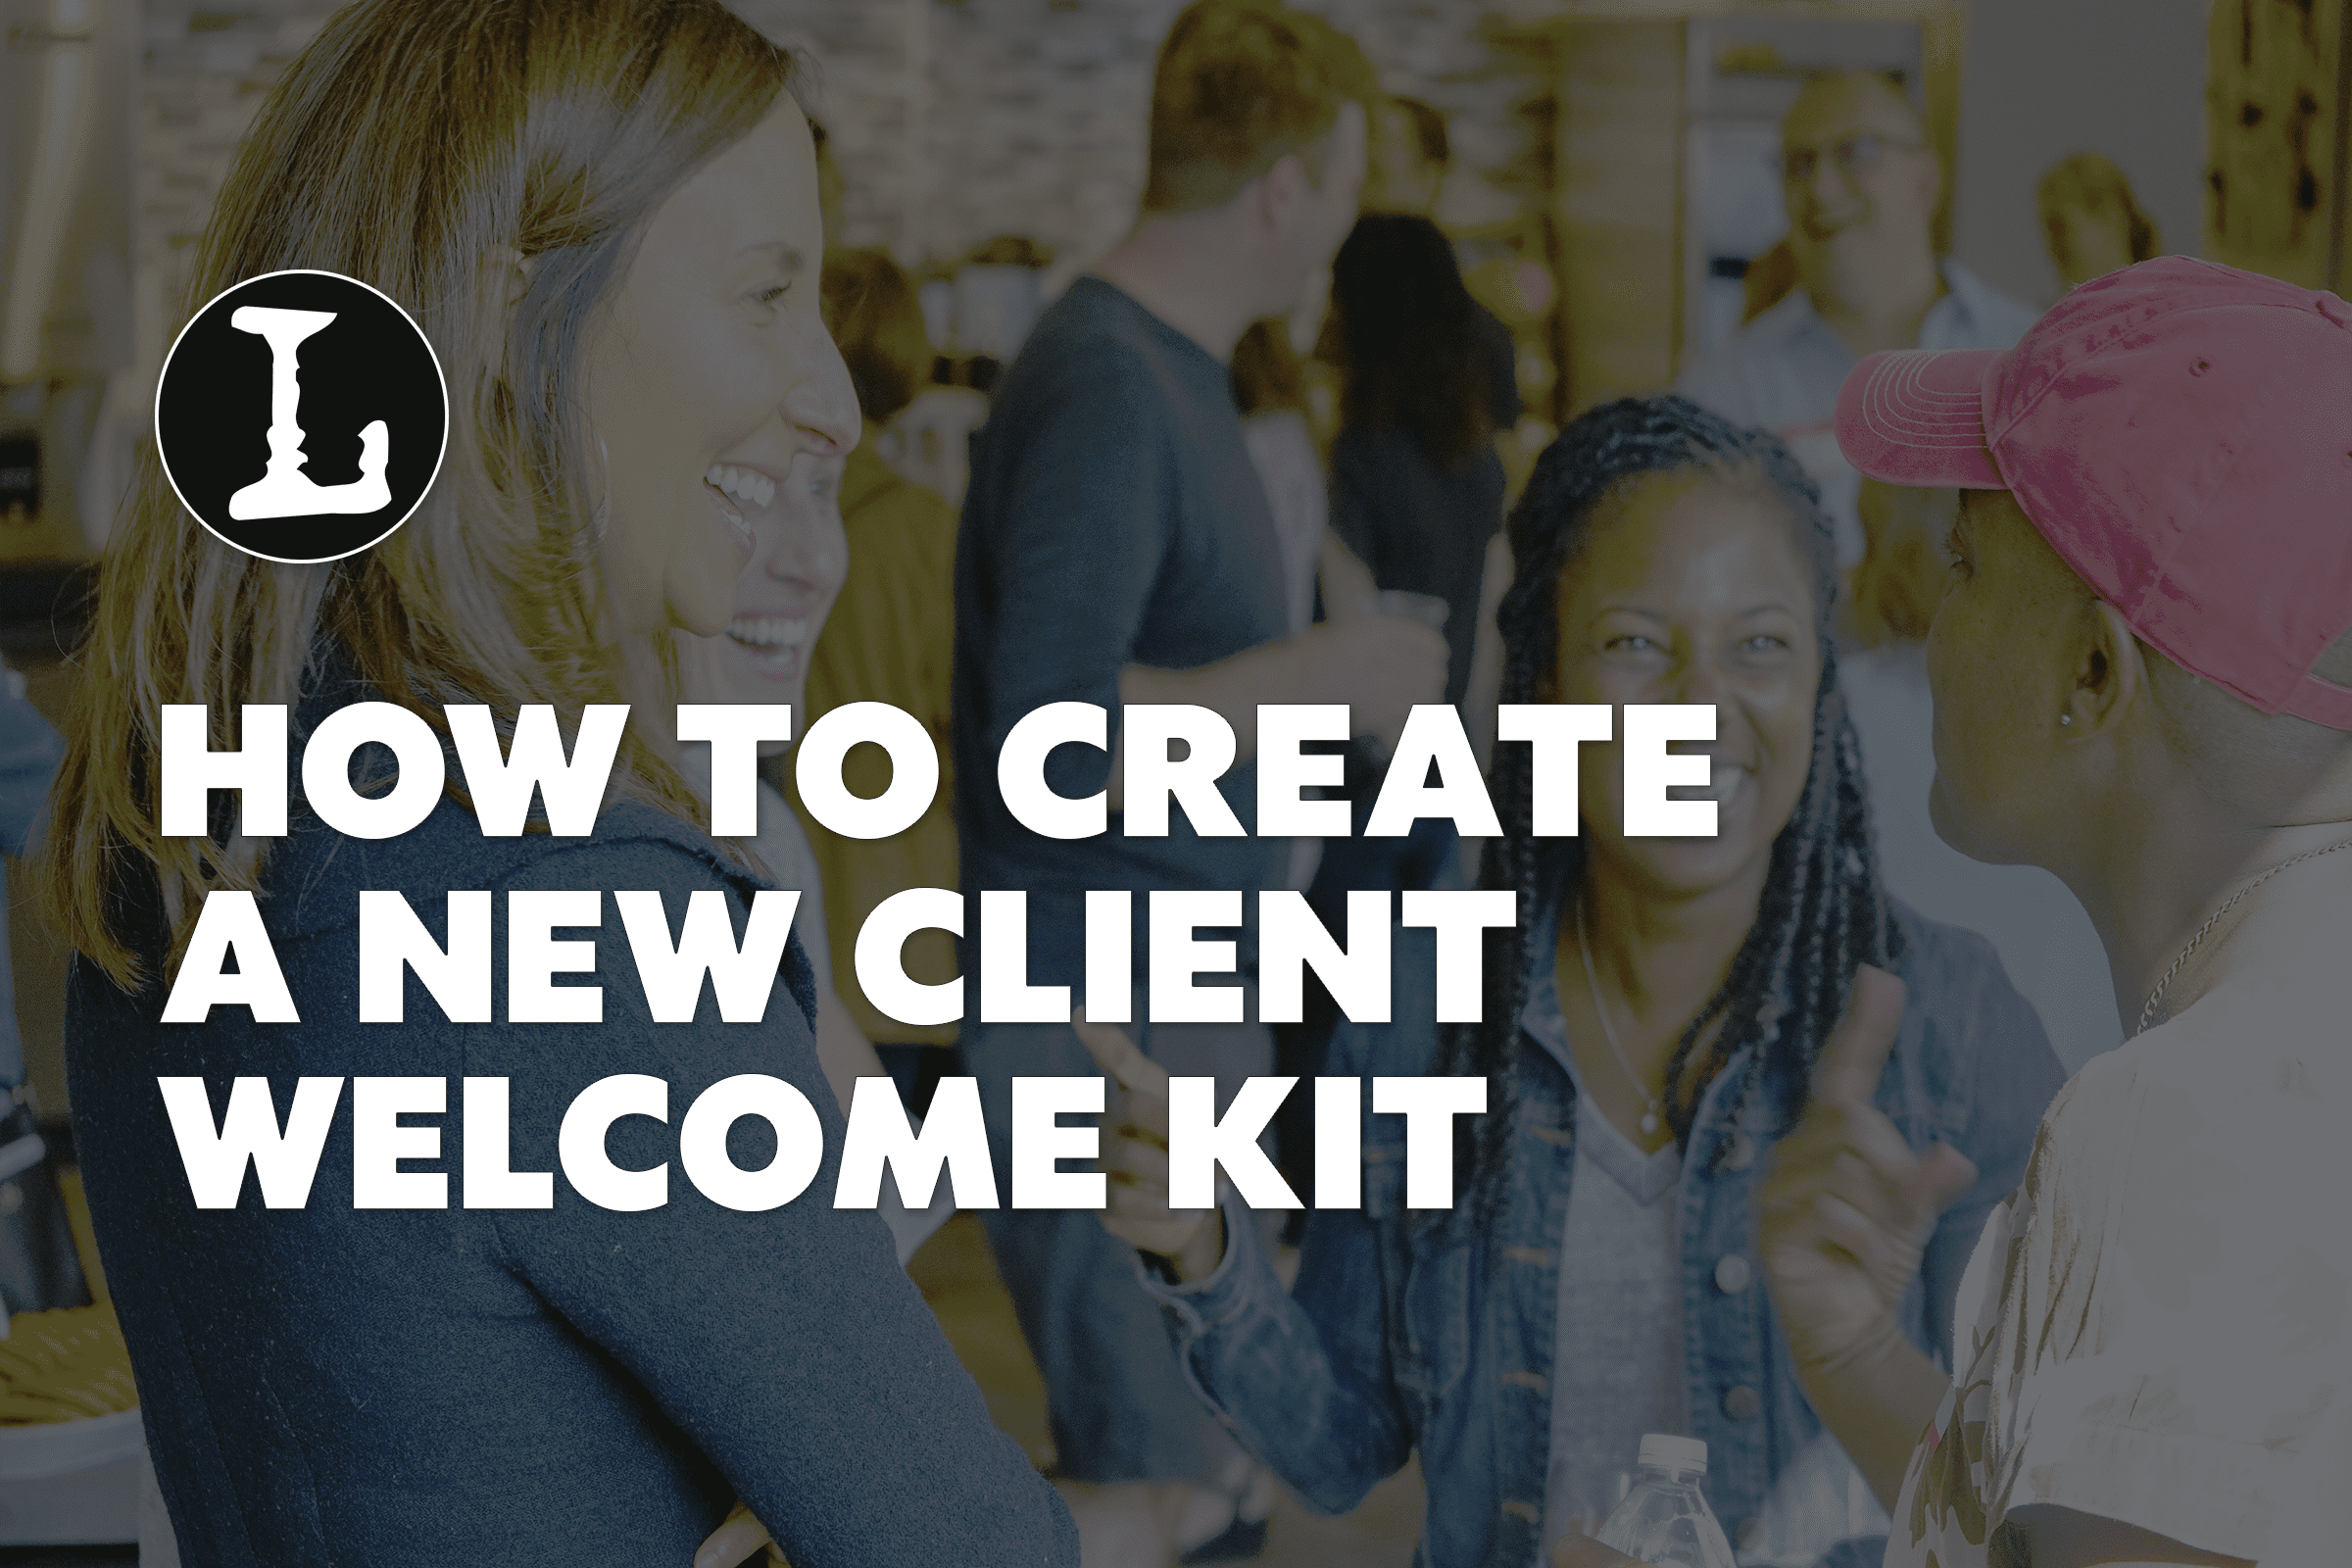 How to create a new client welcome kit